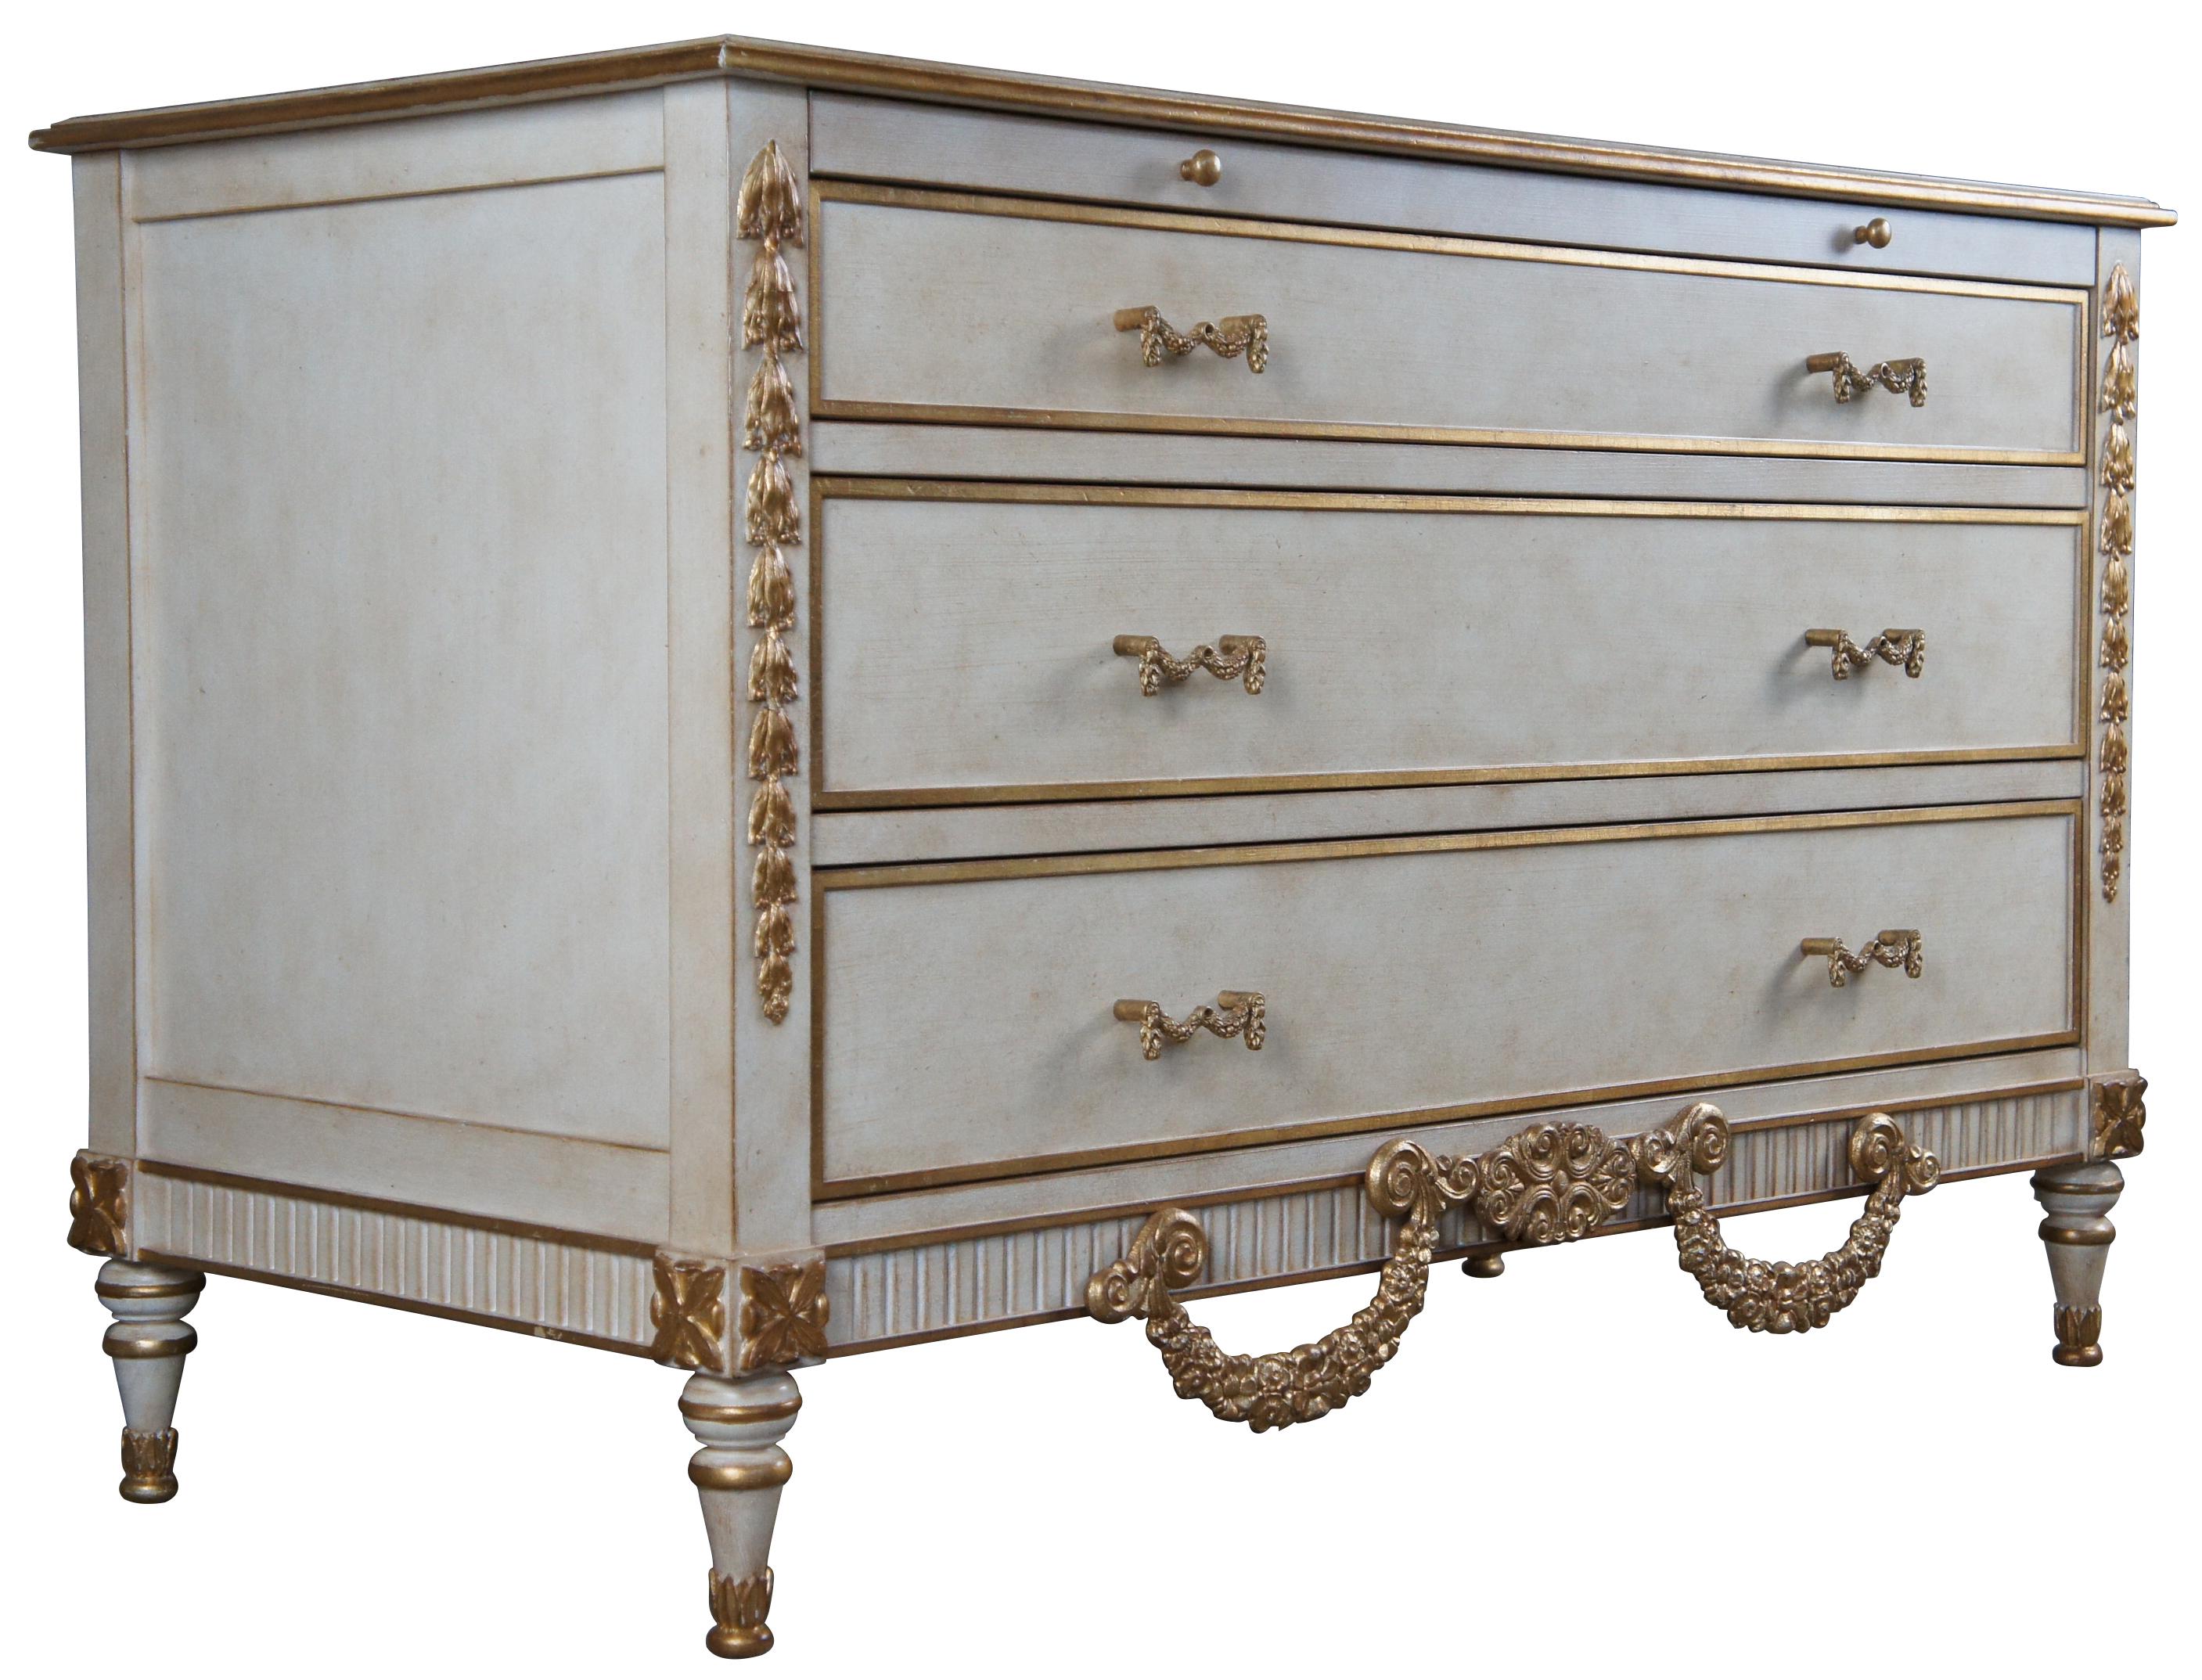 Stunning pair of late 20th century chest of drawers. Attributed to Auffray & Co. Features a blend of Louis XVI and Rococo styling. Finished in white with gold trim. Includes three dovetailed drawers and a large pull-out surface. 

Provenance :